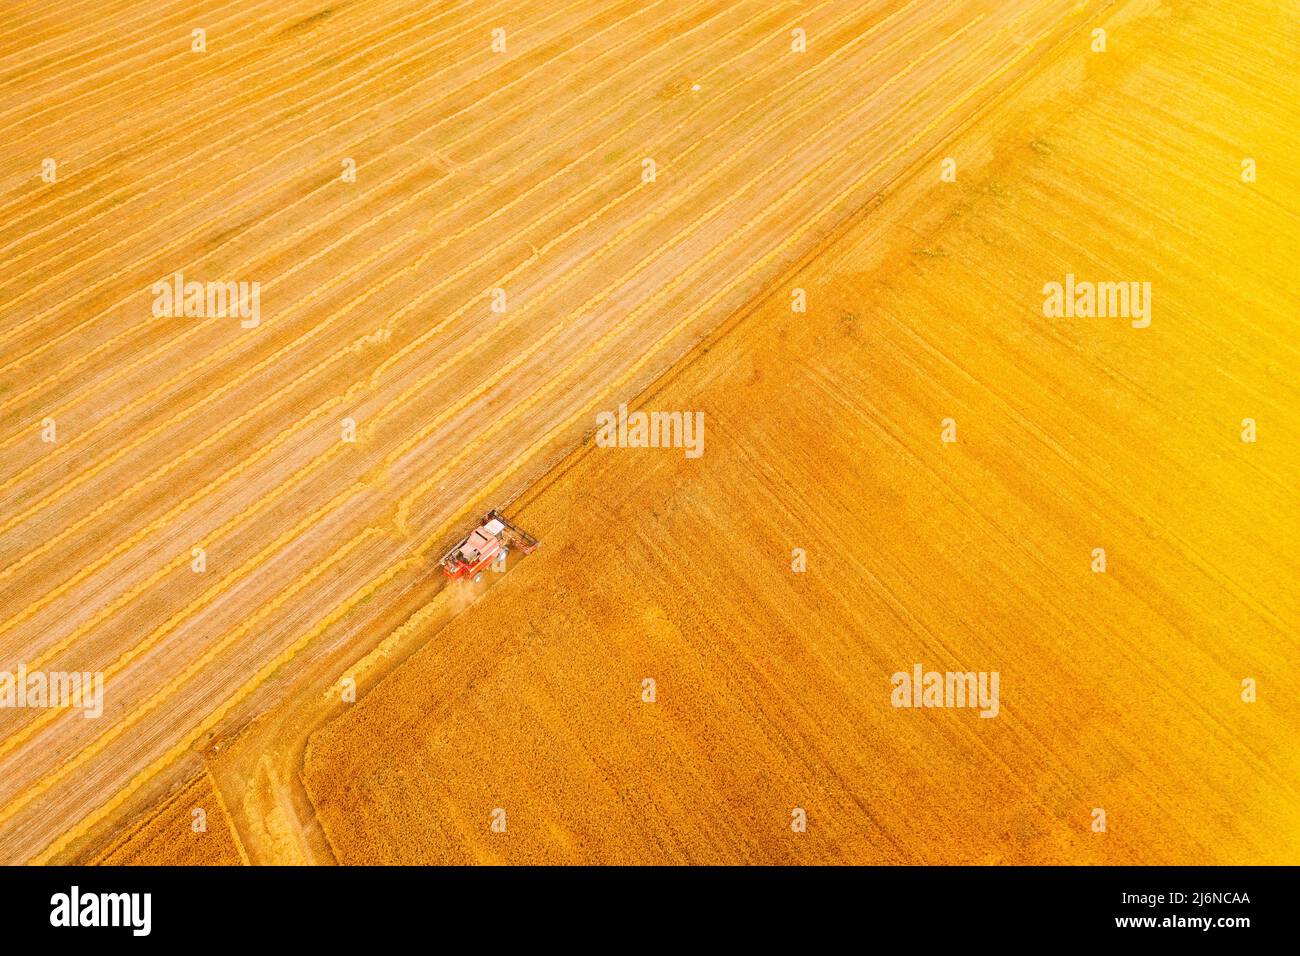 Aerial View Combine Harvester Working In Field. Harvesting Of Wheat In Summer Season. Agricultural Machines Collecting Wheat Seeds Stock Photo